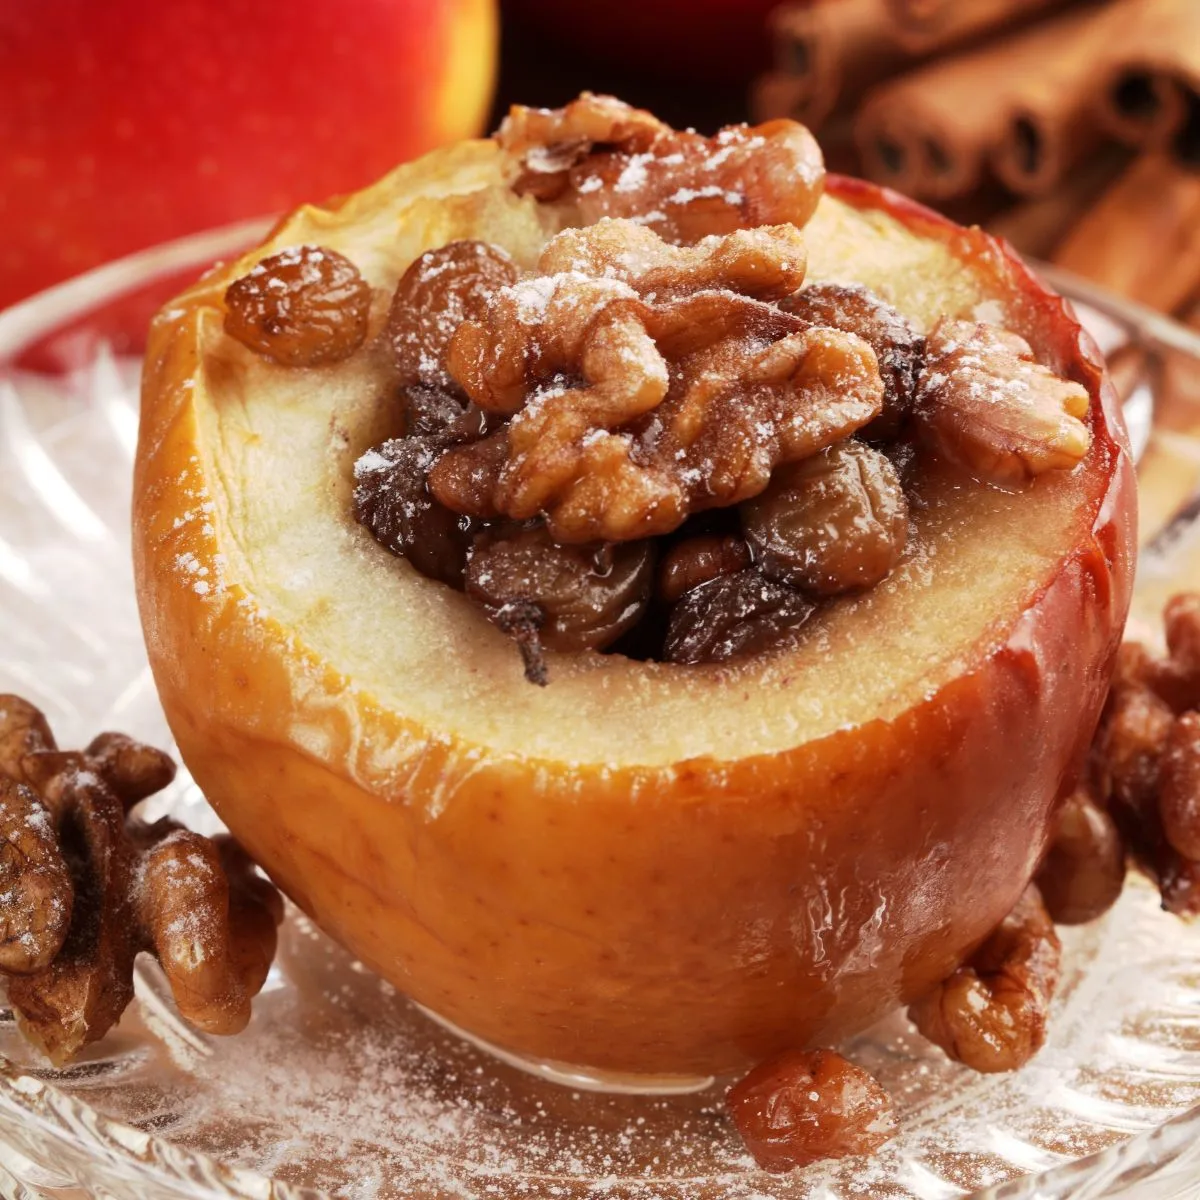 baked apple with yummy toppings